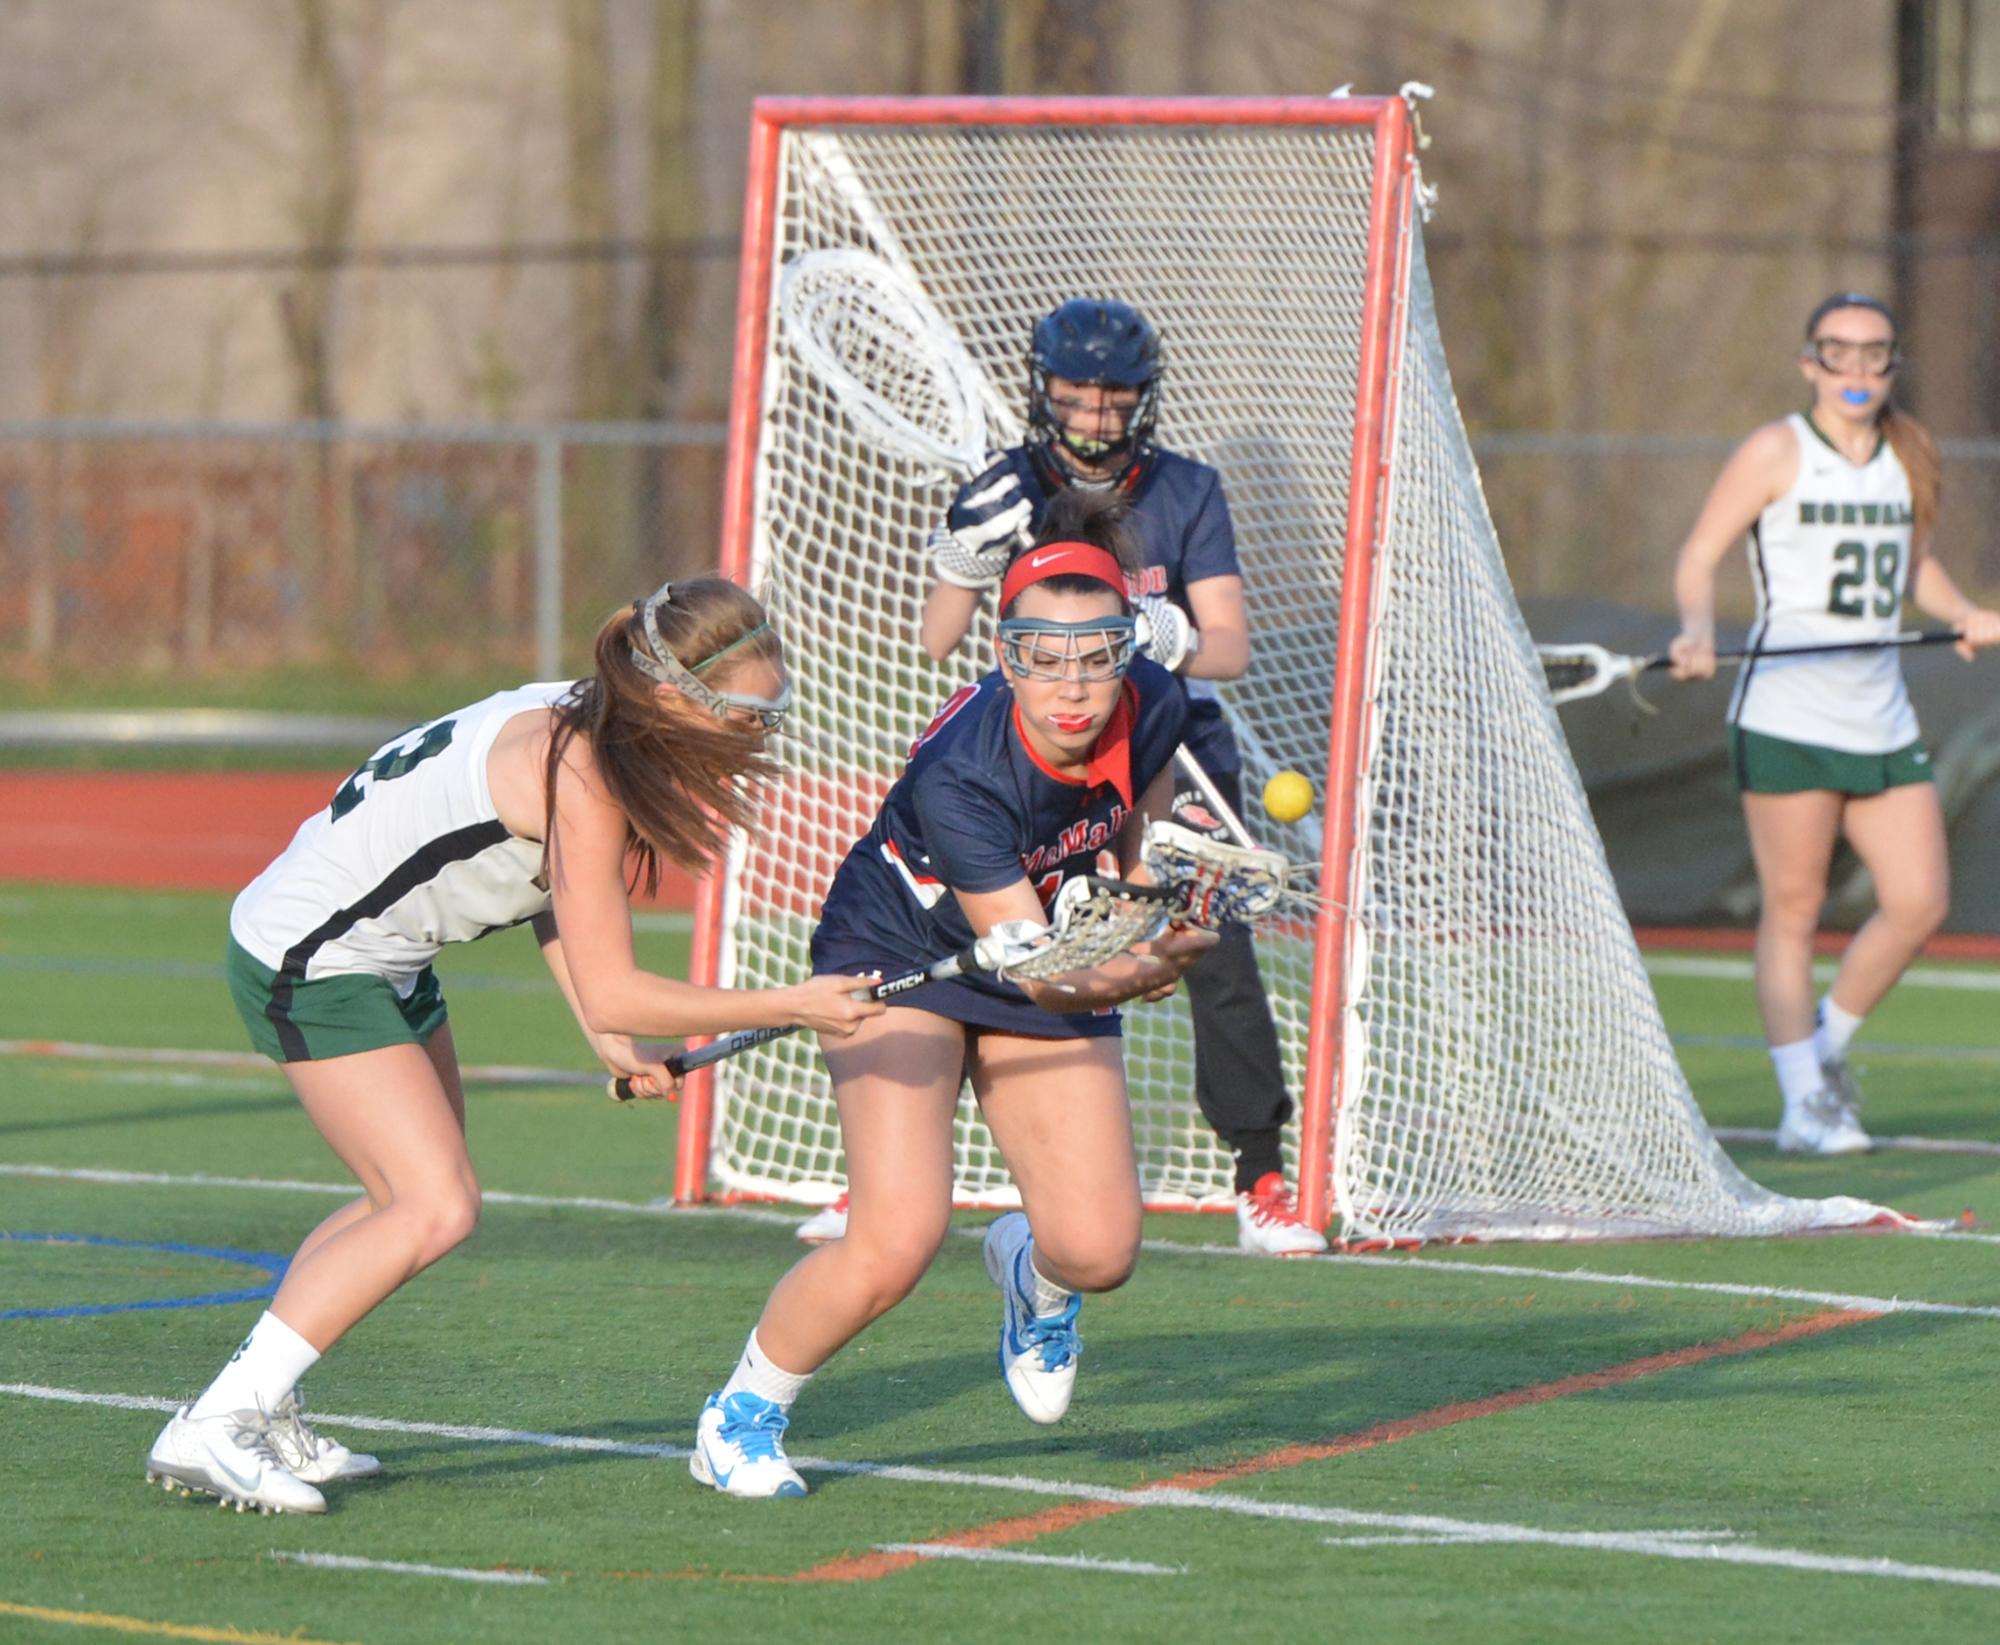 McMahon girls lacrosse appears on upswing - Thehour.com